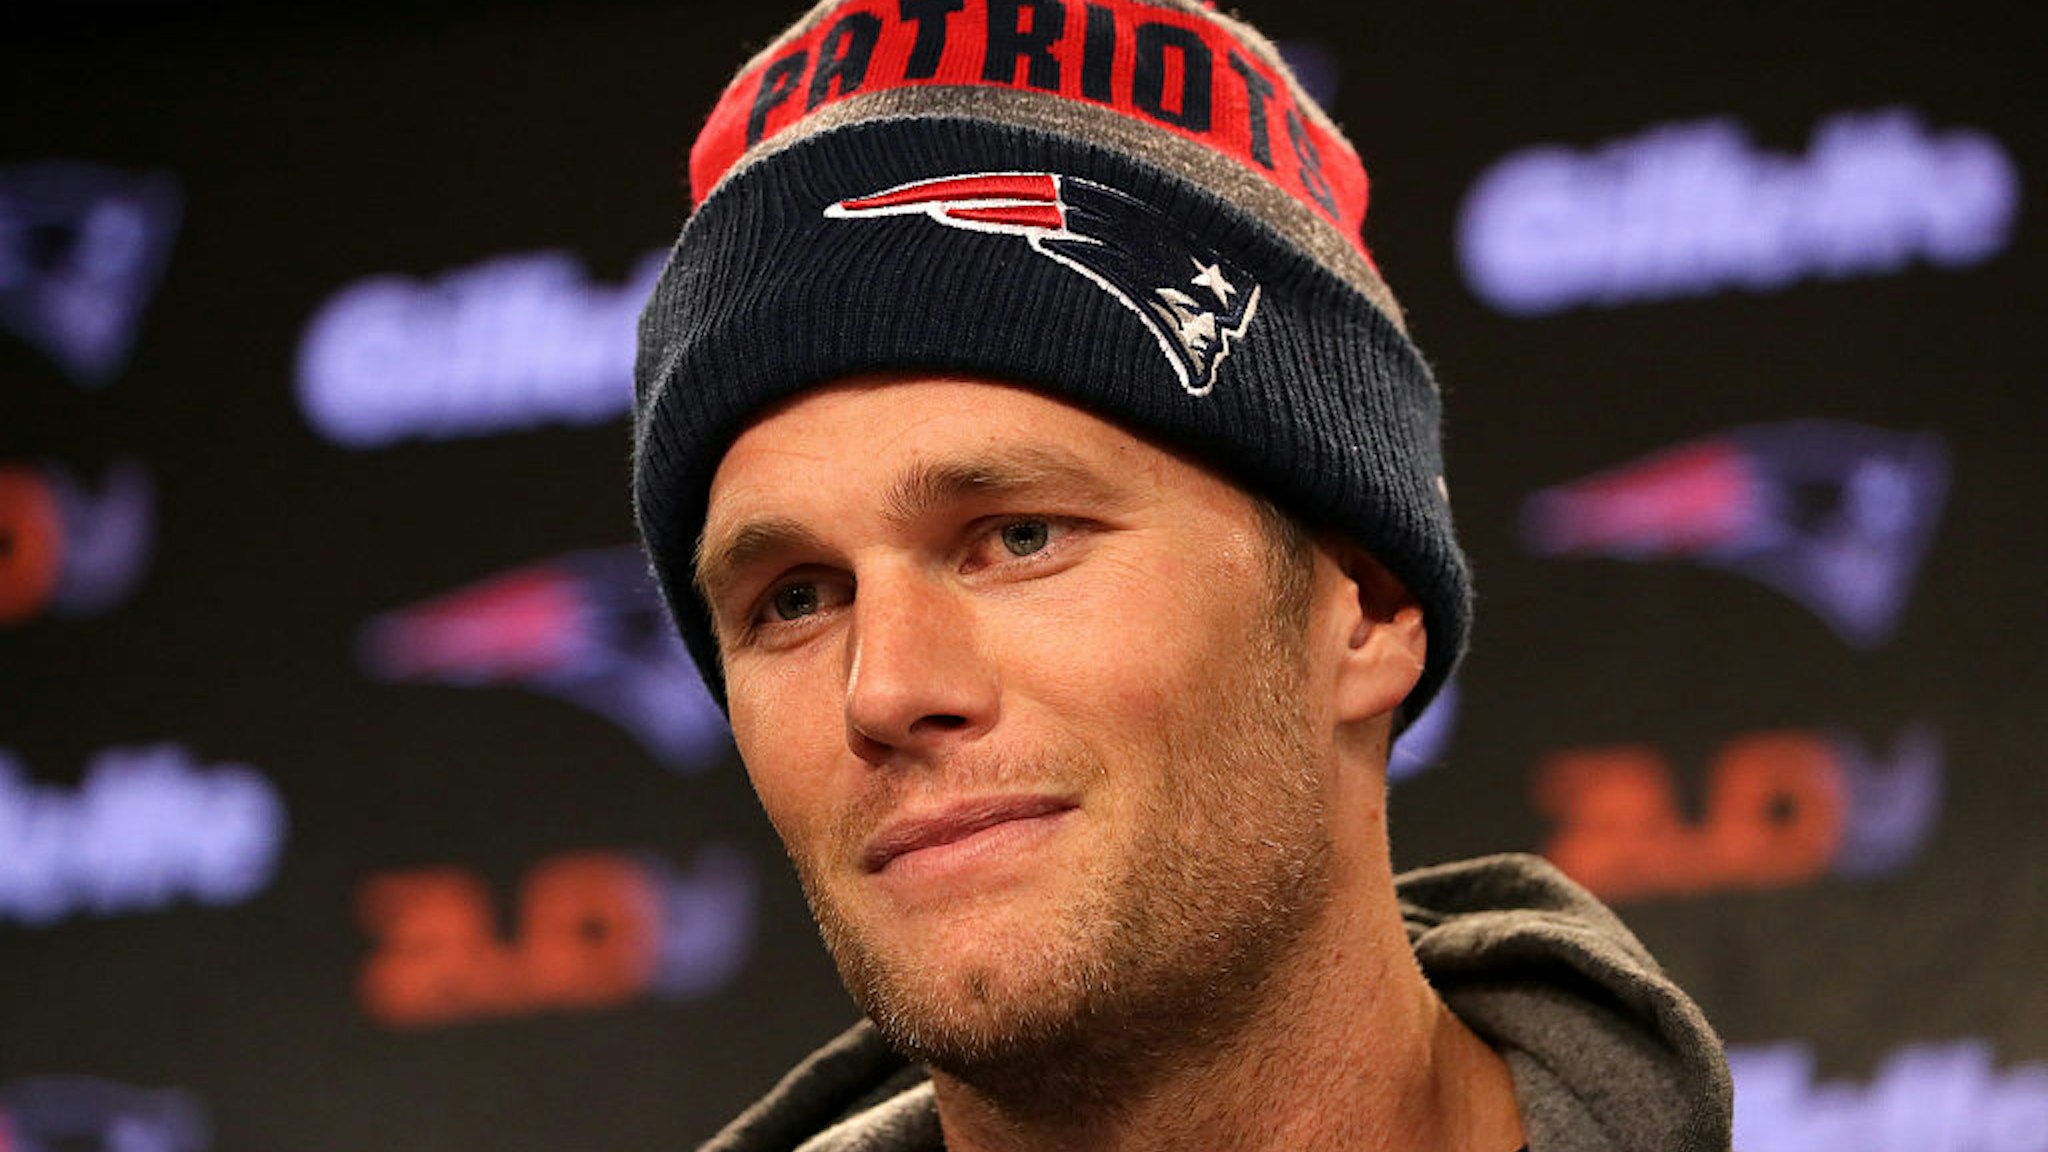 New England Patriots quarterback Tom Brady (12) responds to a question about his support of President Elect Donald Trump during his morning media availability at Gillette Stadium in Foxborough, Mass., on Nov. 09, 2016.